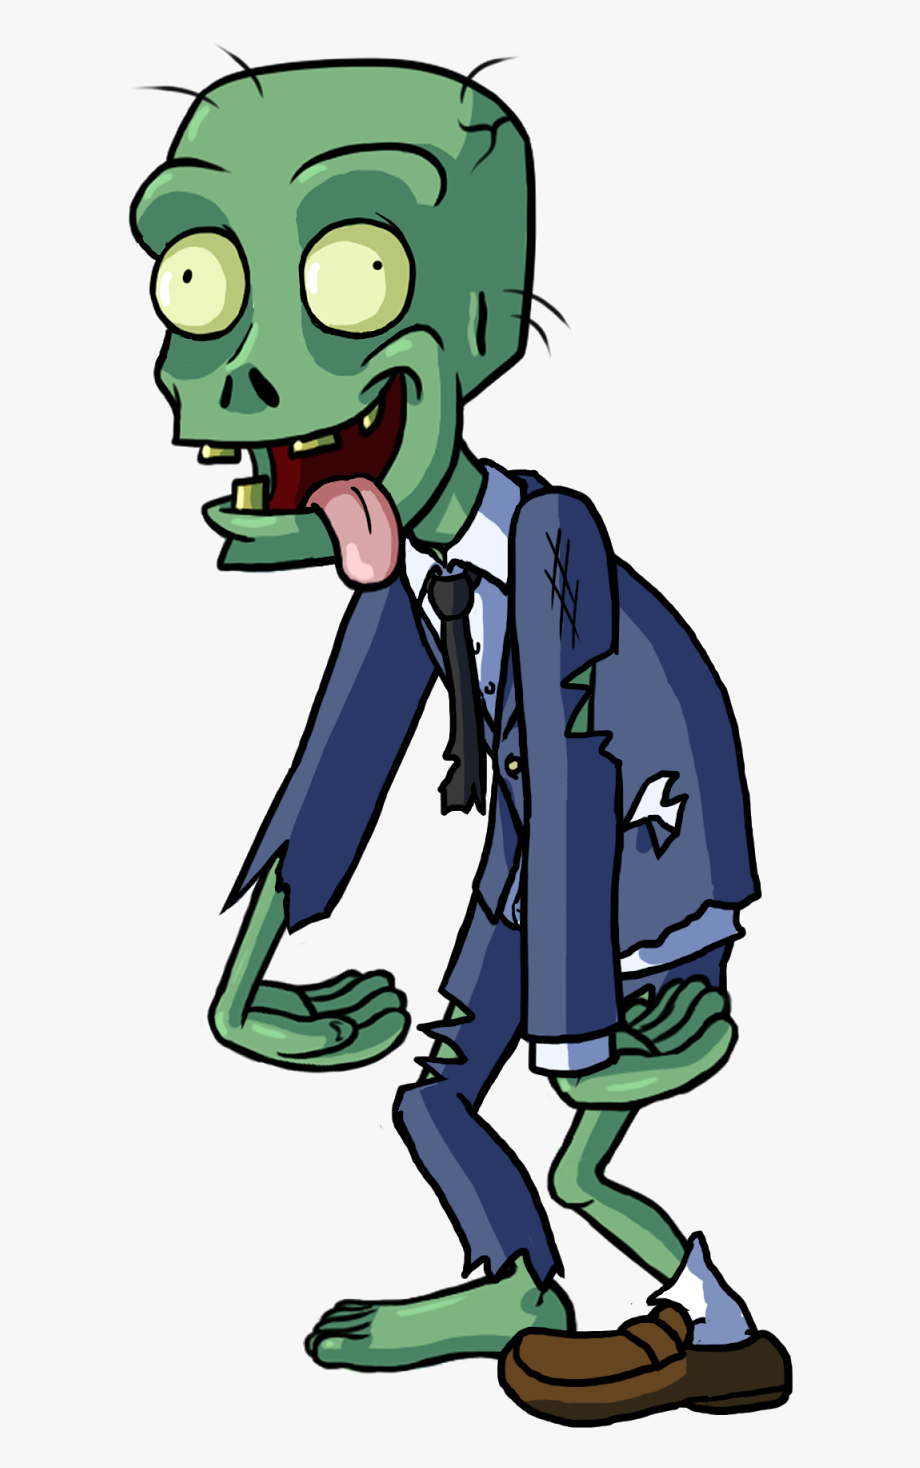 Zombie clipart animated. Png images free download